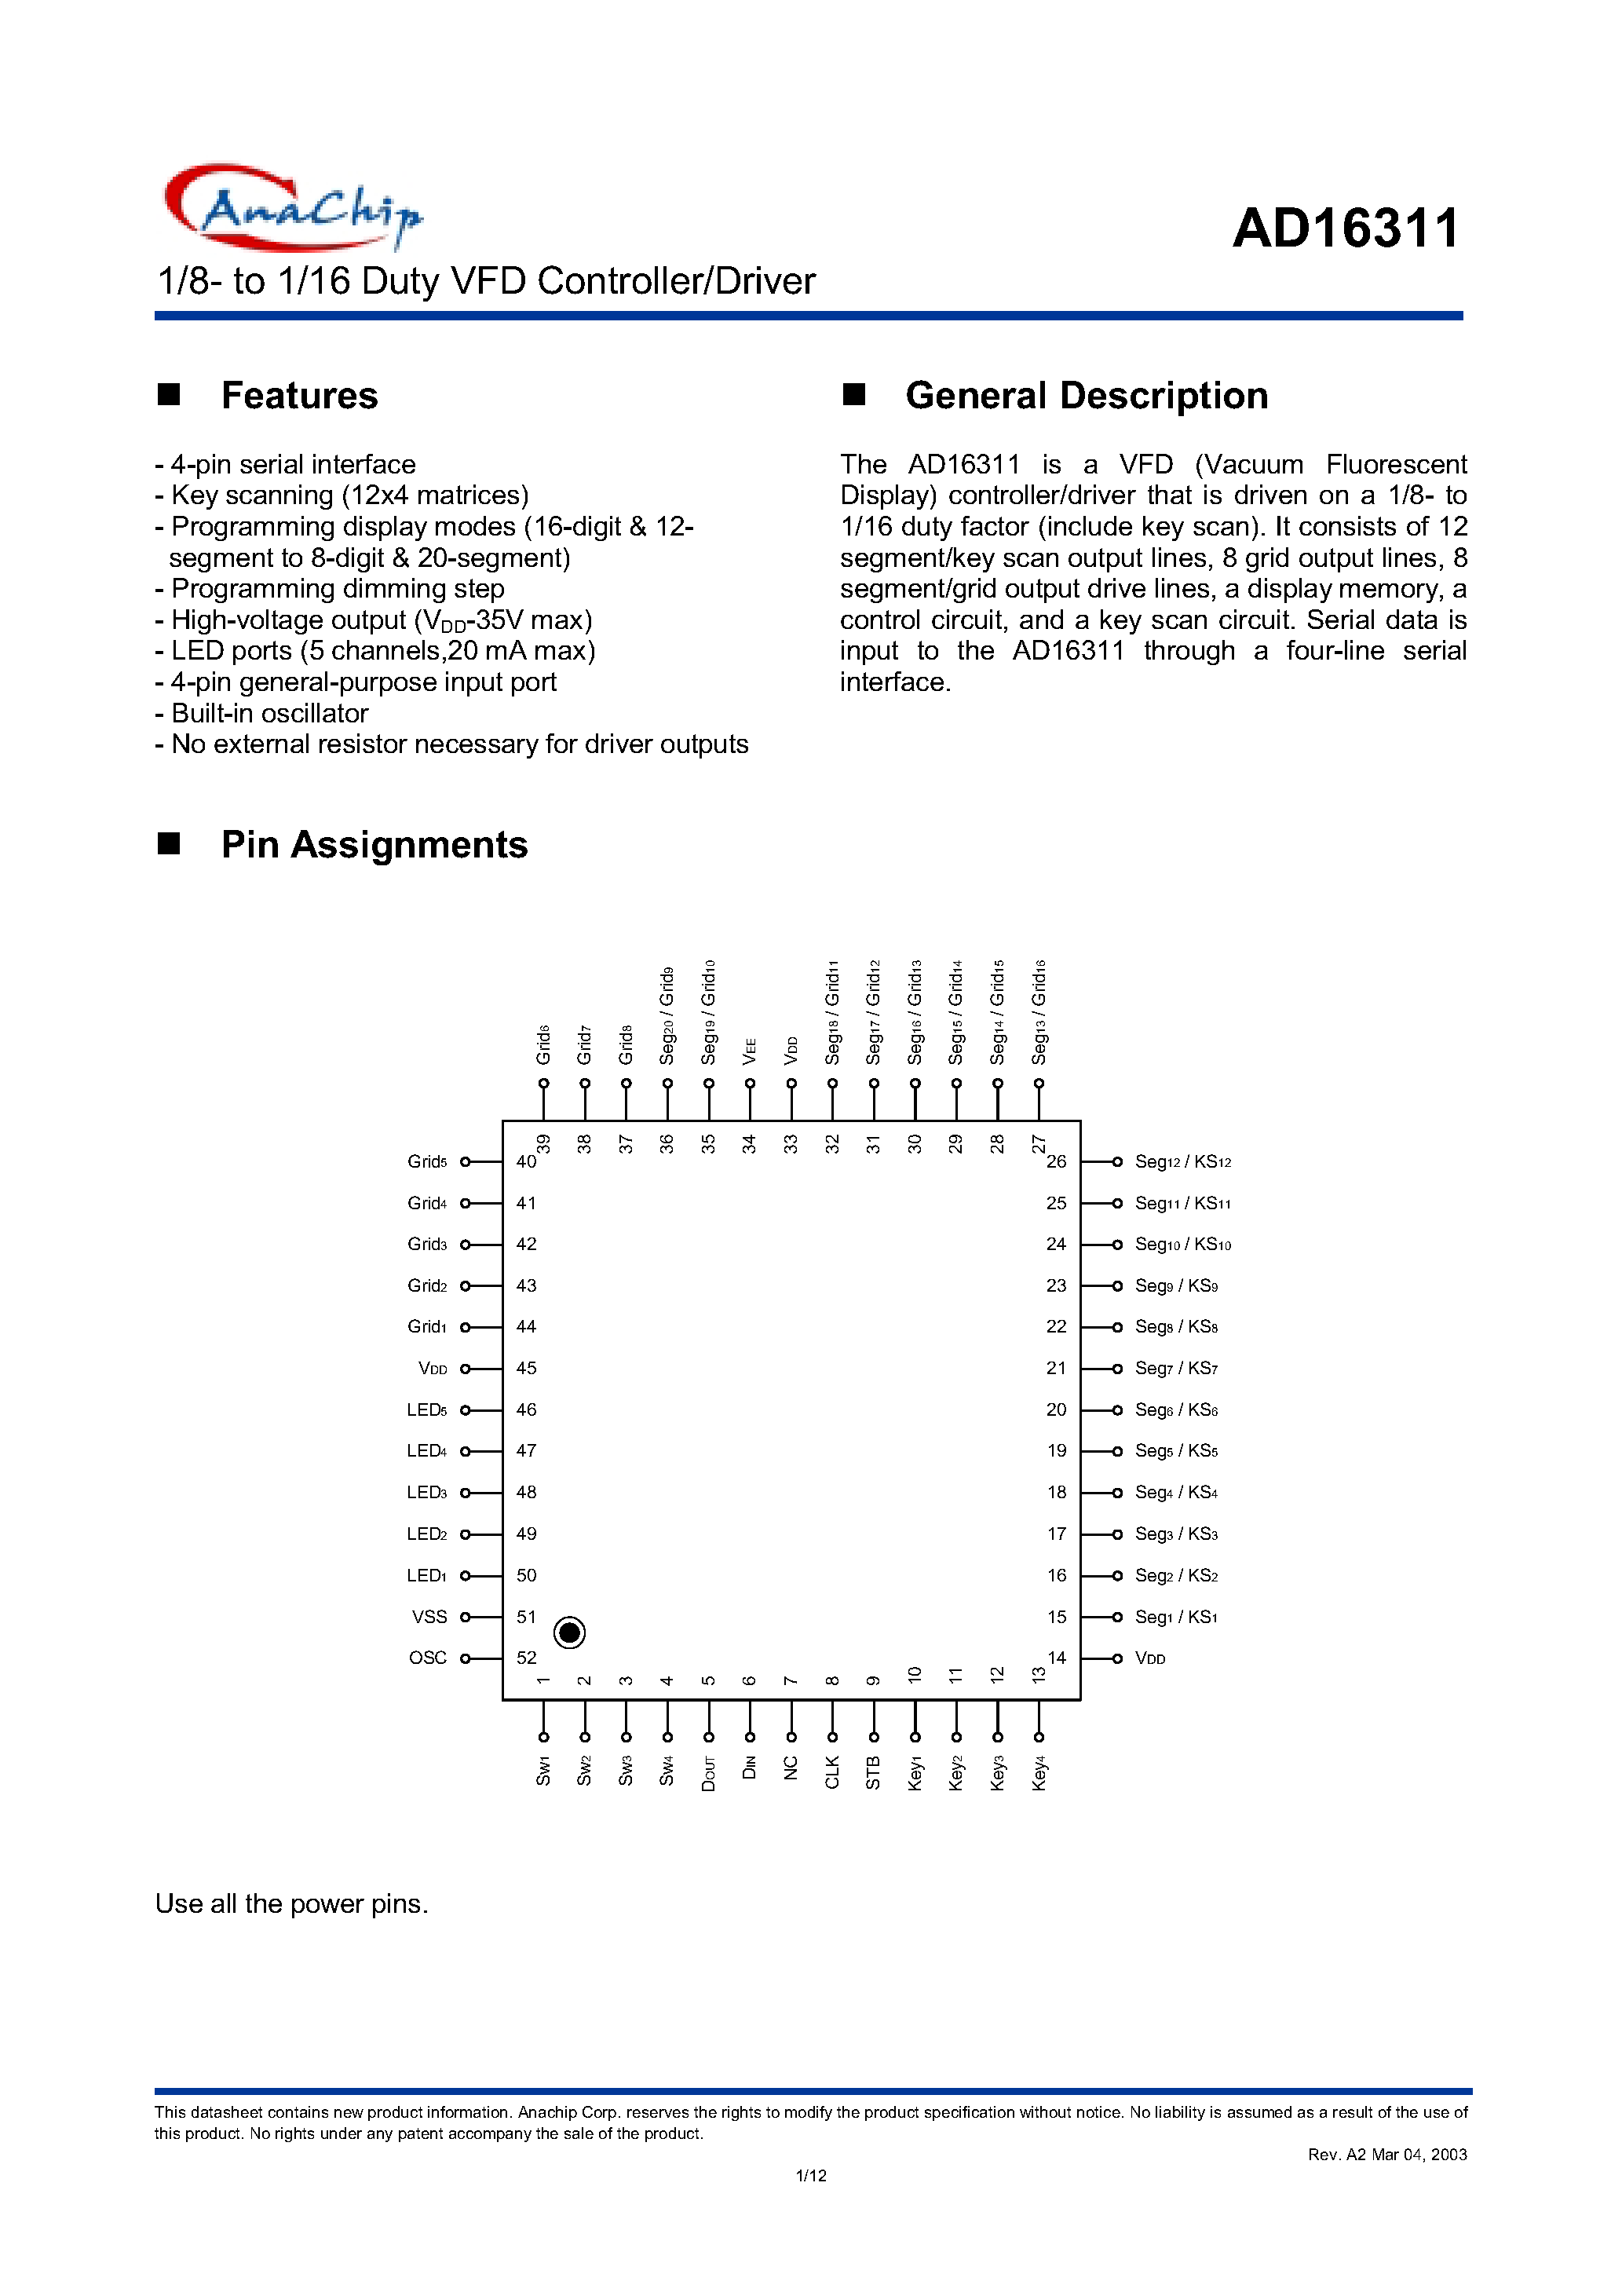 Datasheet AD16311 - 1/8 TO 1/16 DUTY VFD CONTROLLER/DRIVER page 1